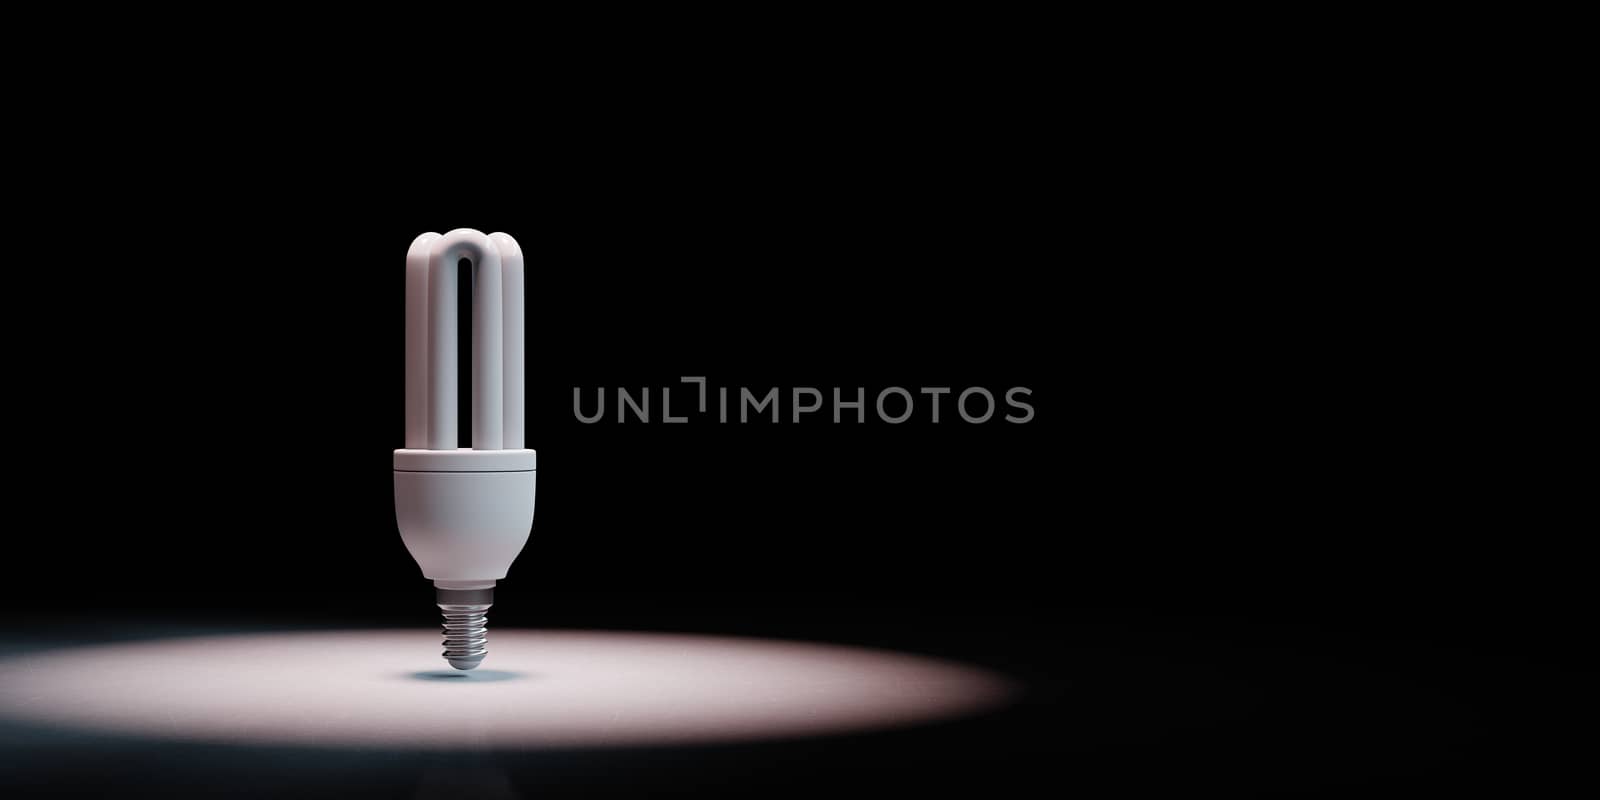 Fluorescent Lamp Spotlighted on Black Background by make